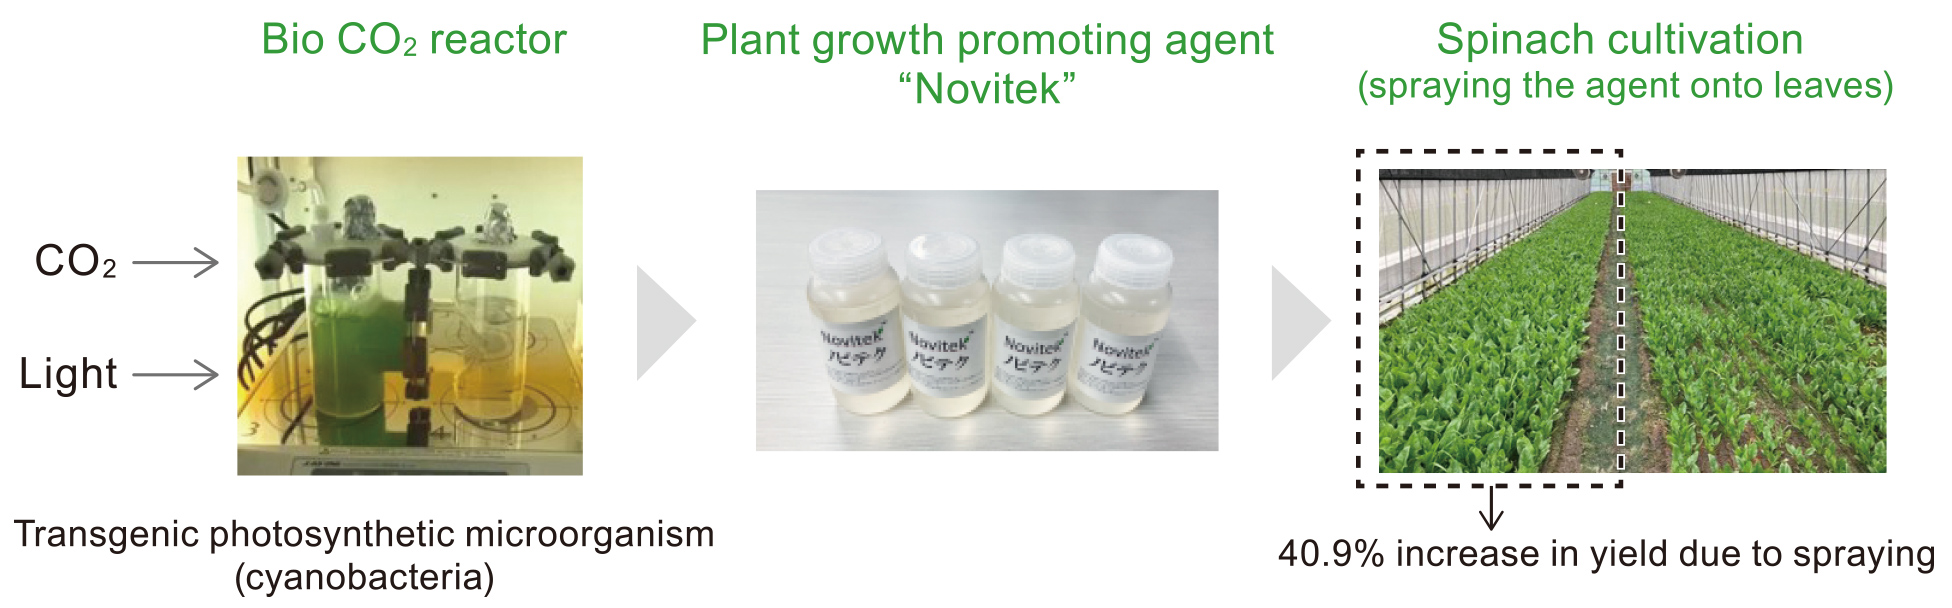 We recover plant growth stimulants from photosynthetic microorganisms modified by our proprietary technology. Spraying this liquid, branded as Novitek, on the leaves of crops can increase the yield by up to 40%.